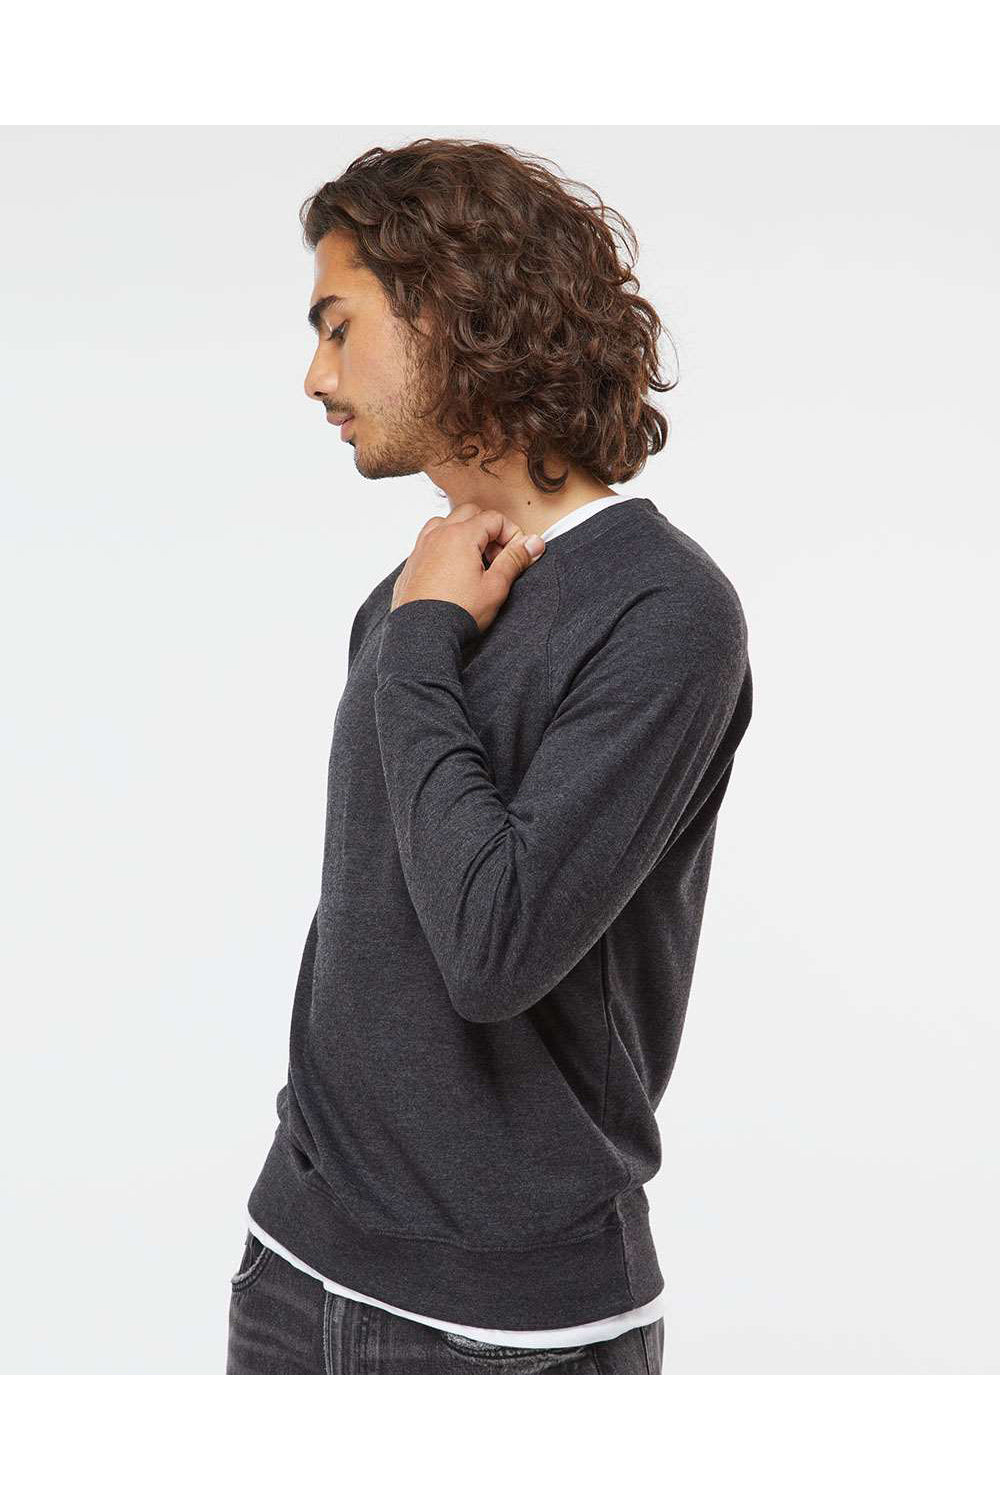 Independent Trading Co. SS1000C Mens Icon Loopback Terry Crewneck Sweatshirt Heather Charcoal Grey Model Side